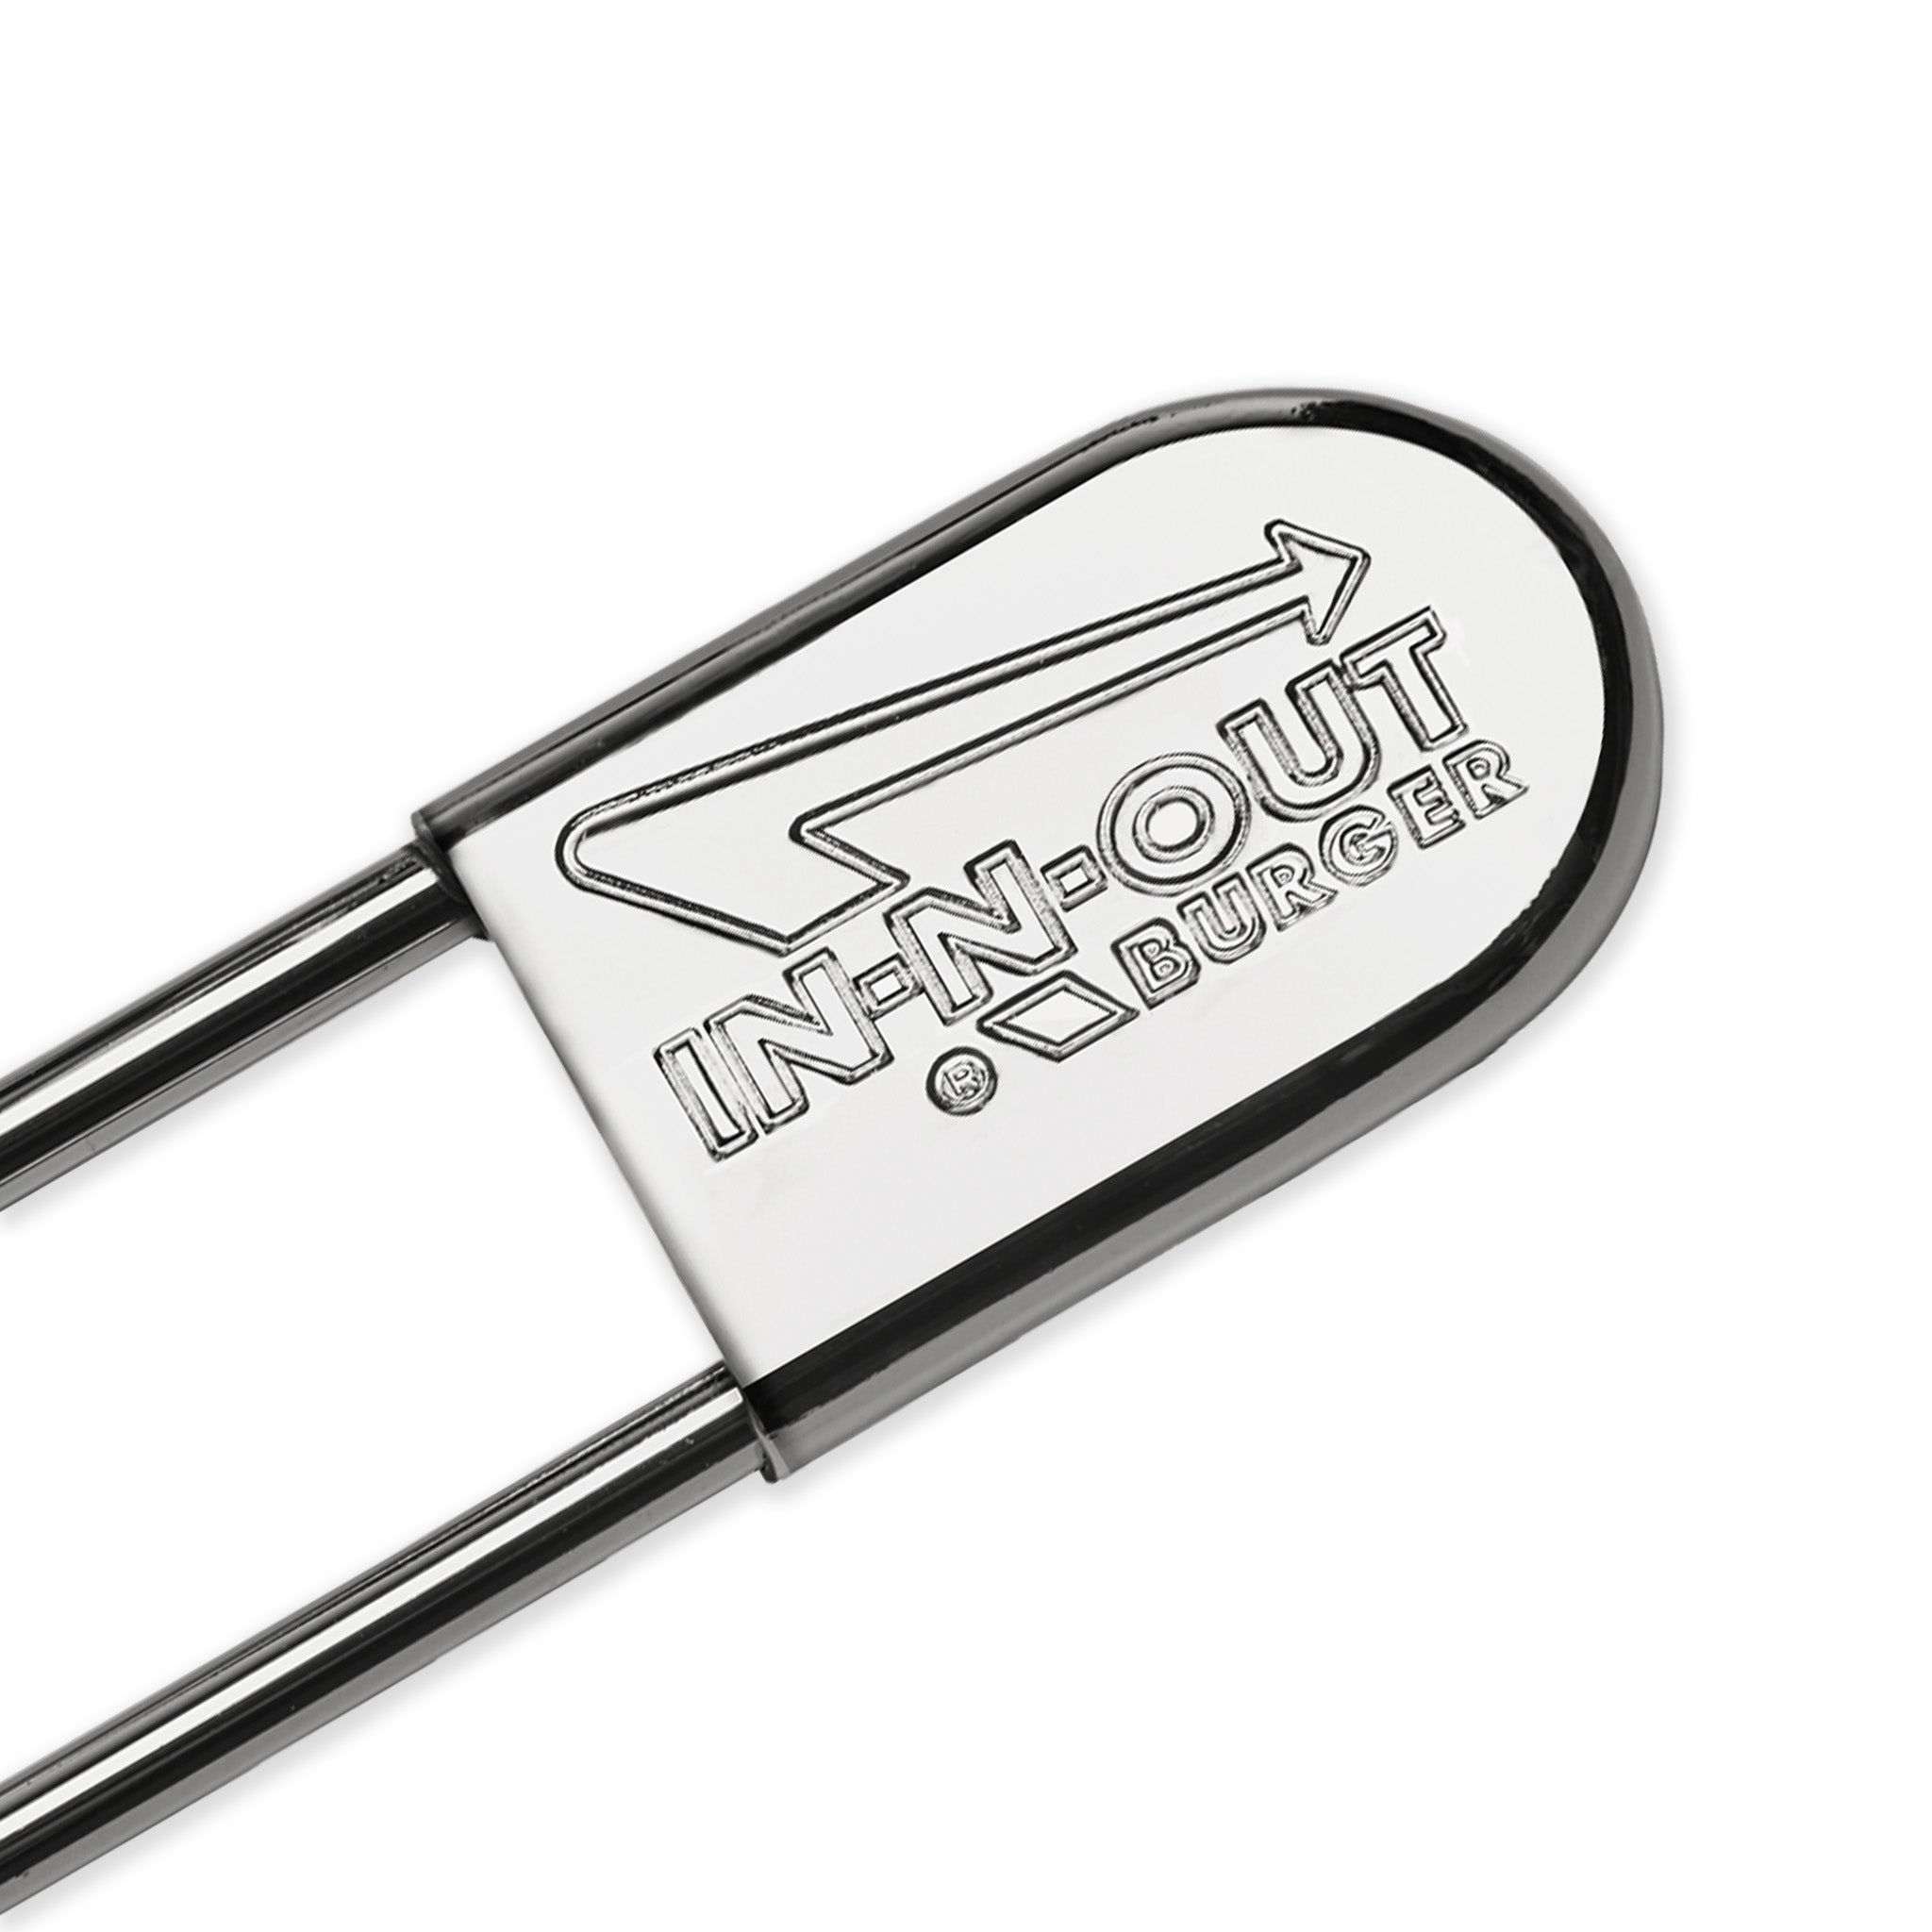 APRON PIN – In-N-Out Burger Company Store